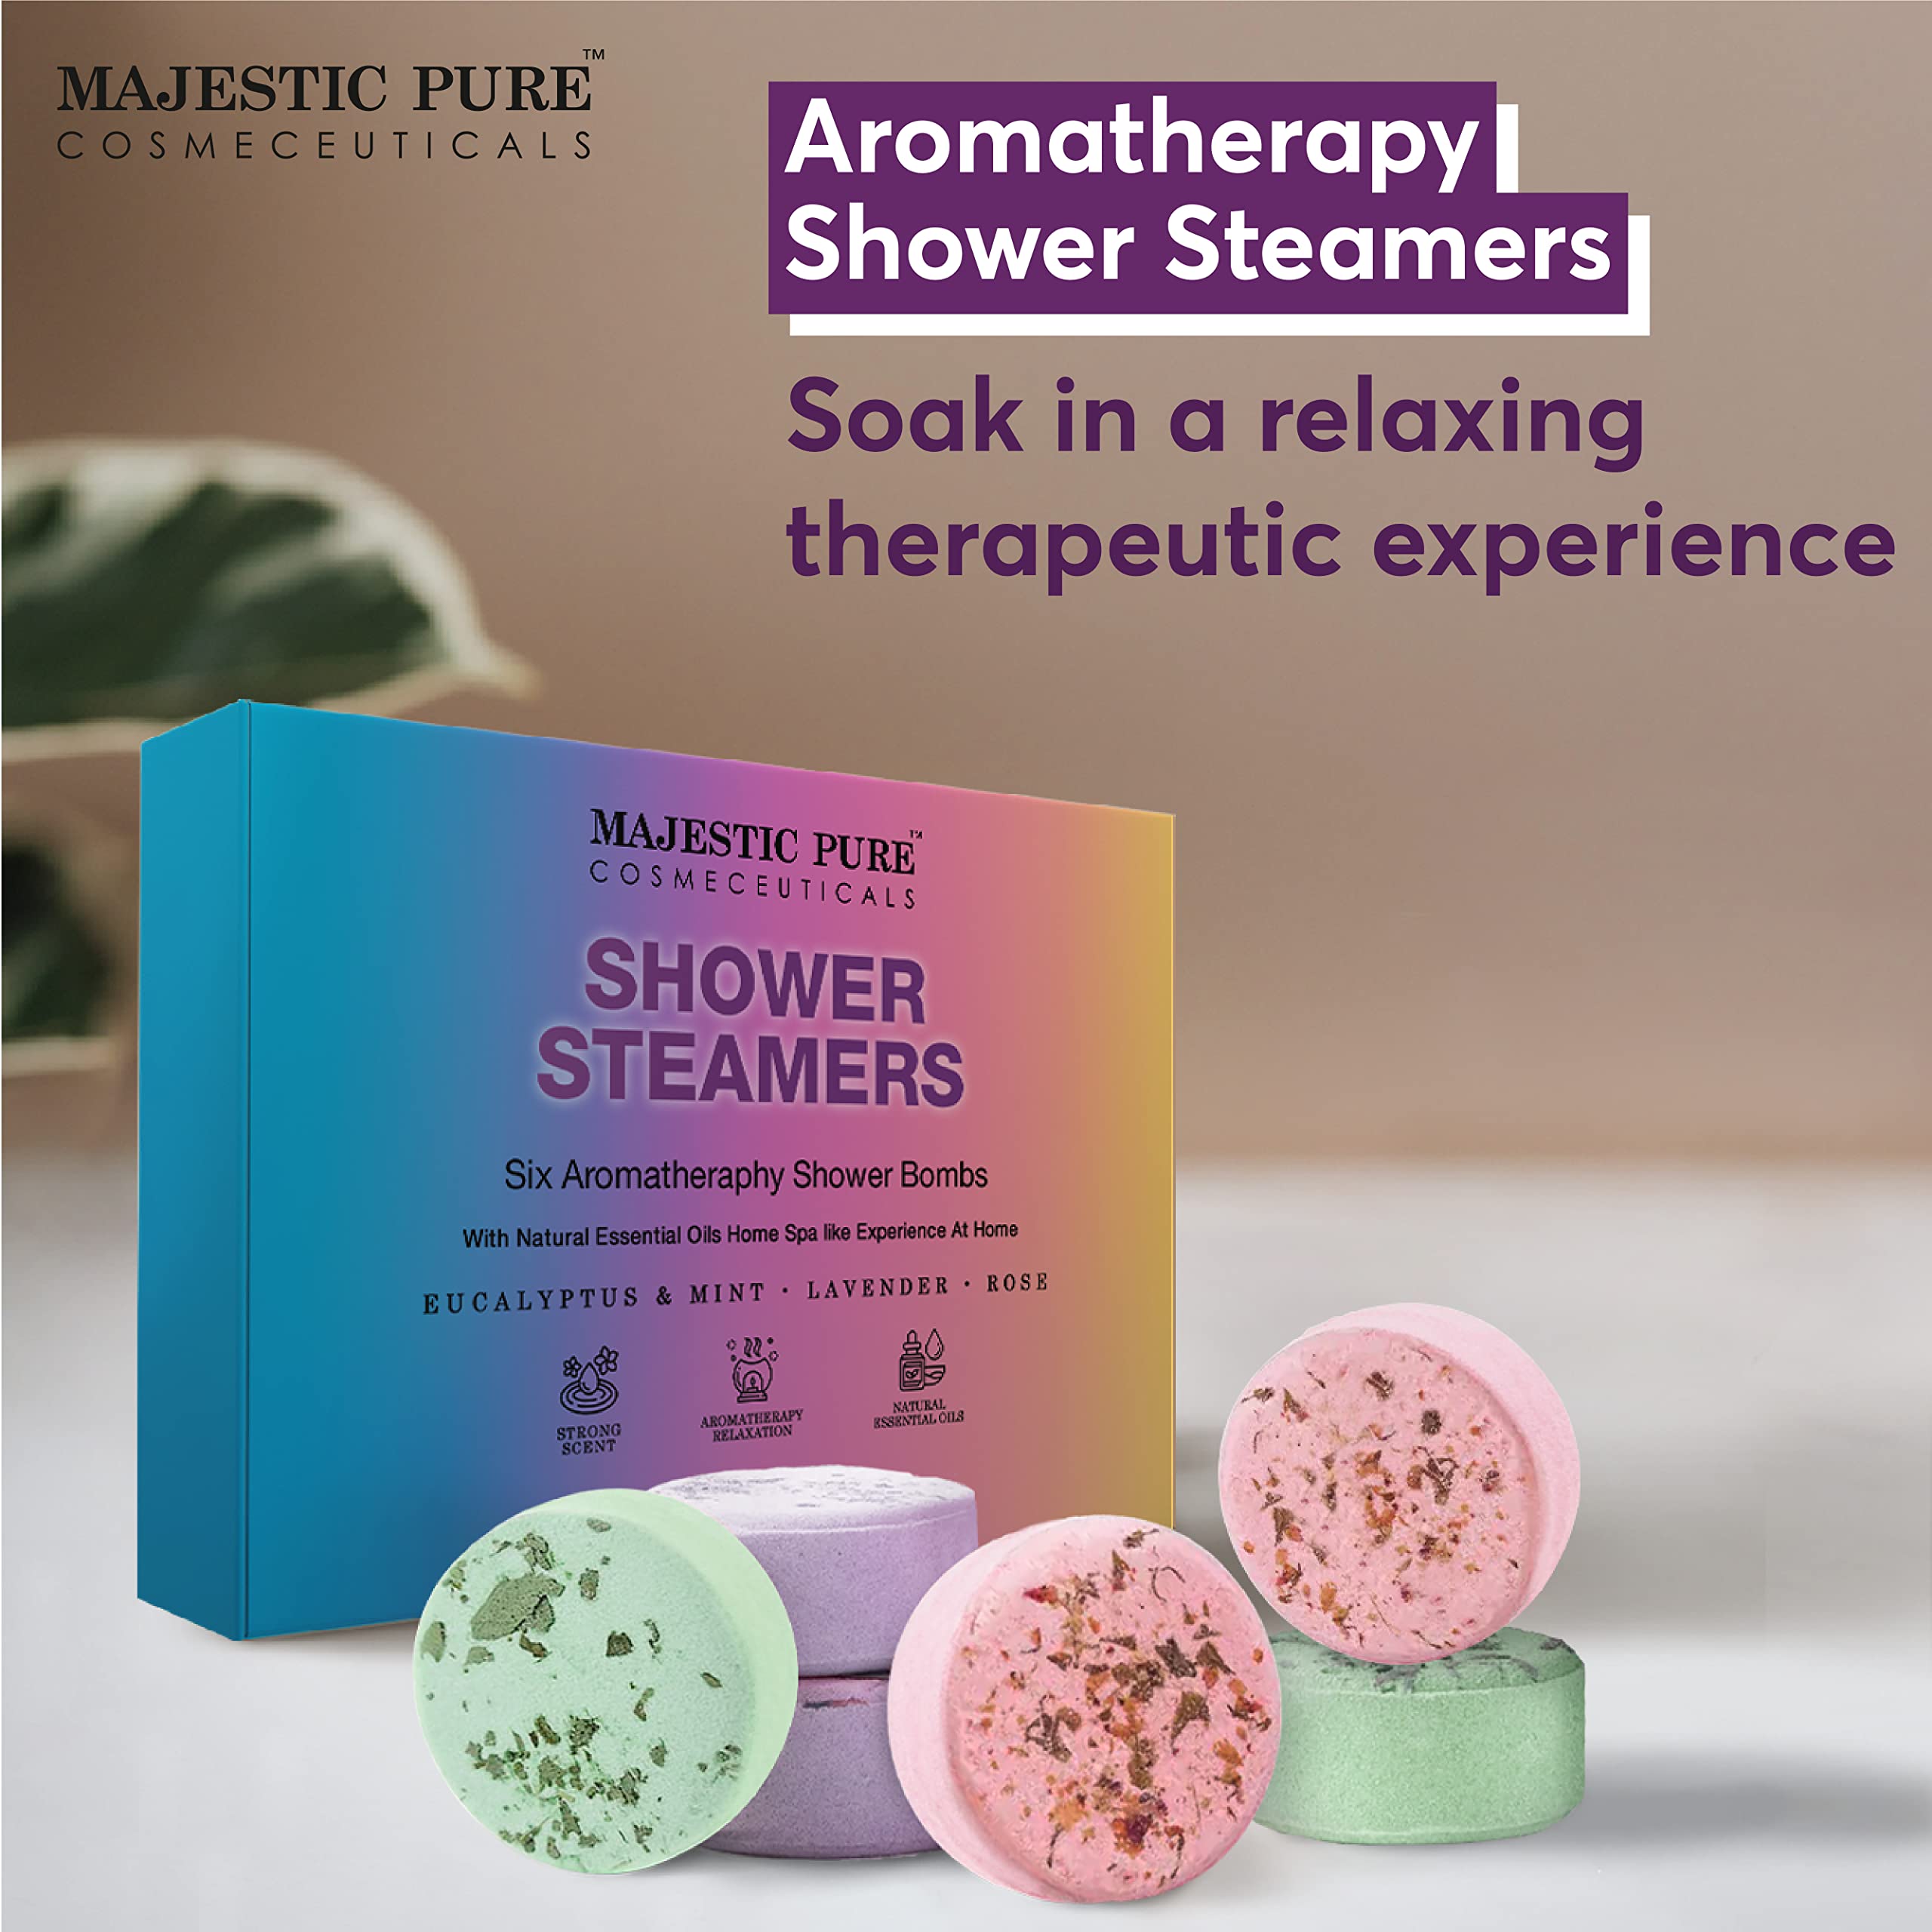 Majestic Pure Shower Steamers | Variety Pack of 6 Shower Tablets with Essential Oils | Relaxing & Rejuvenating | Gifts for Men & Women